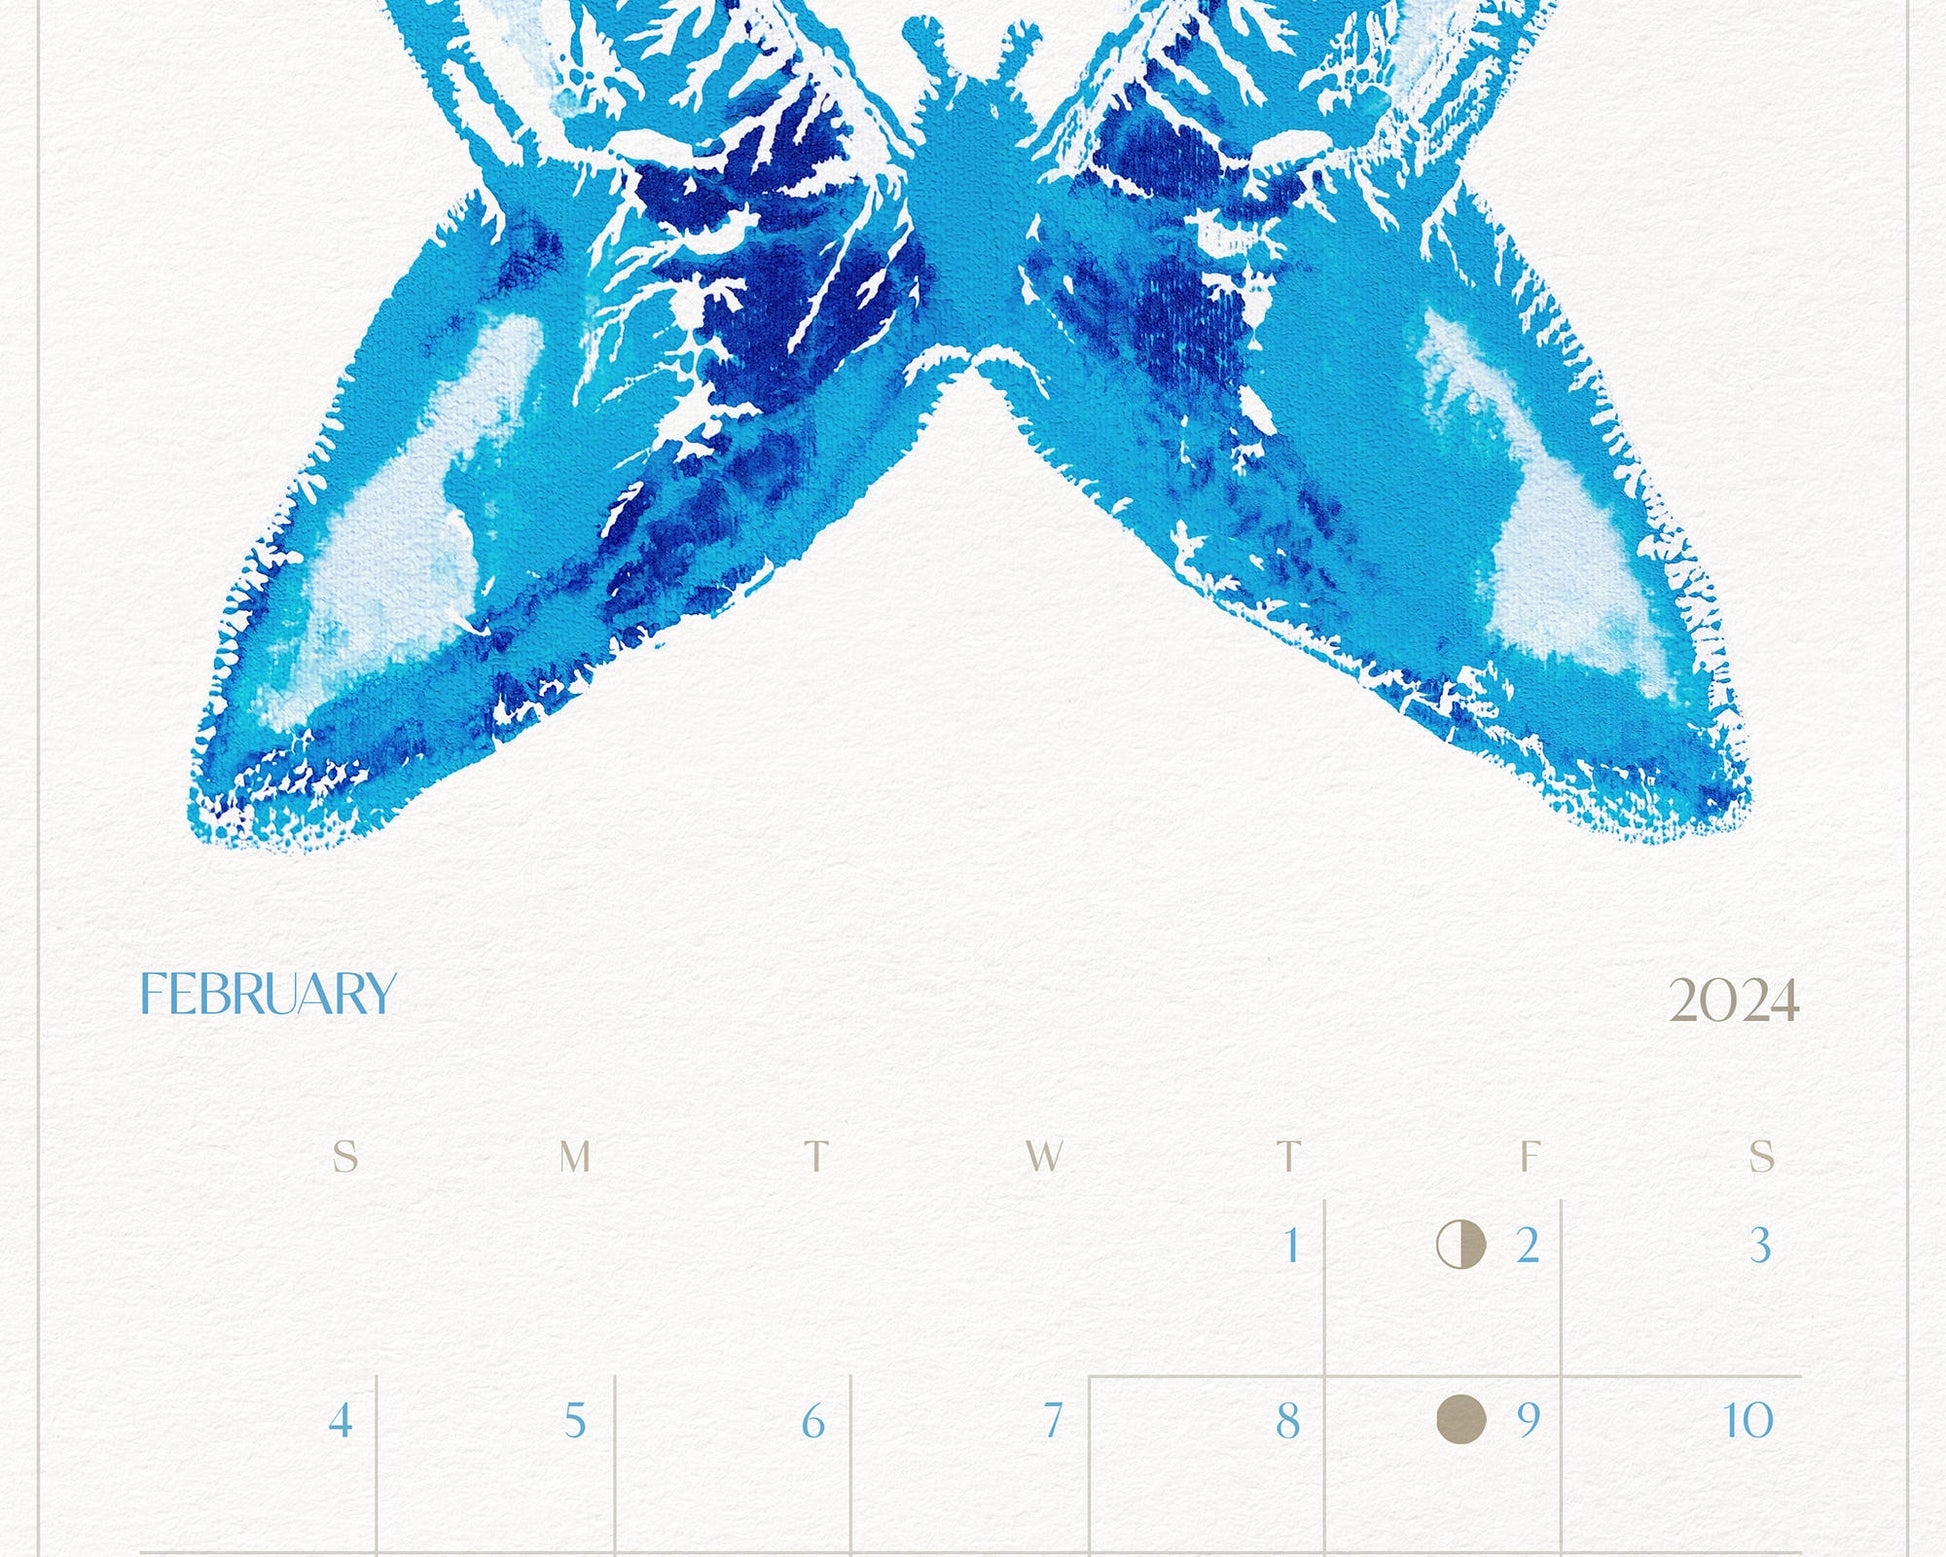 Rainbow abstract butterflies Large printable illustrated calendar 2024 Monthly planner 11x17in wall art for New year gift INSTANT DOWNLOAD, Large Minimalist art, INSTANT DOWNLOAD, digital note, Printable wall art, New year gift, moth art, Lunar calendar 2024, kitchen dining room bedroom modern living room wall decor